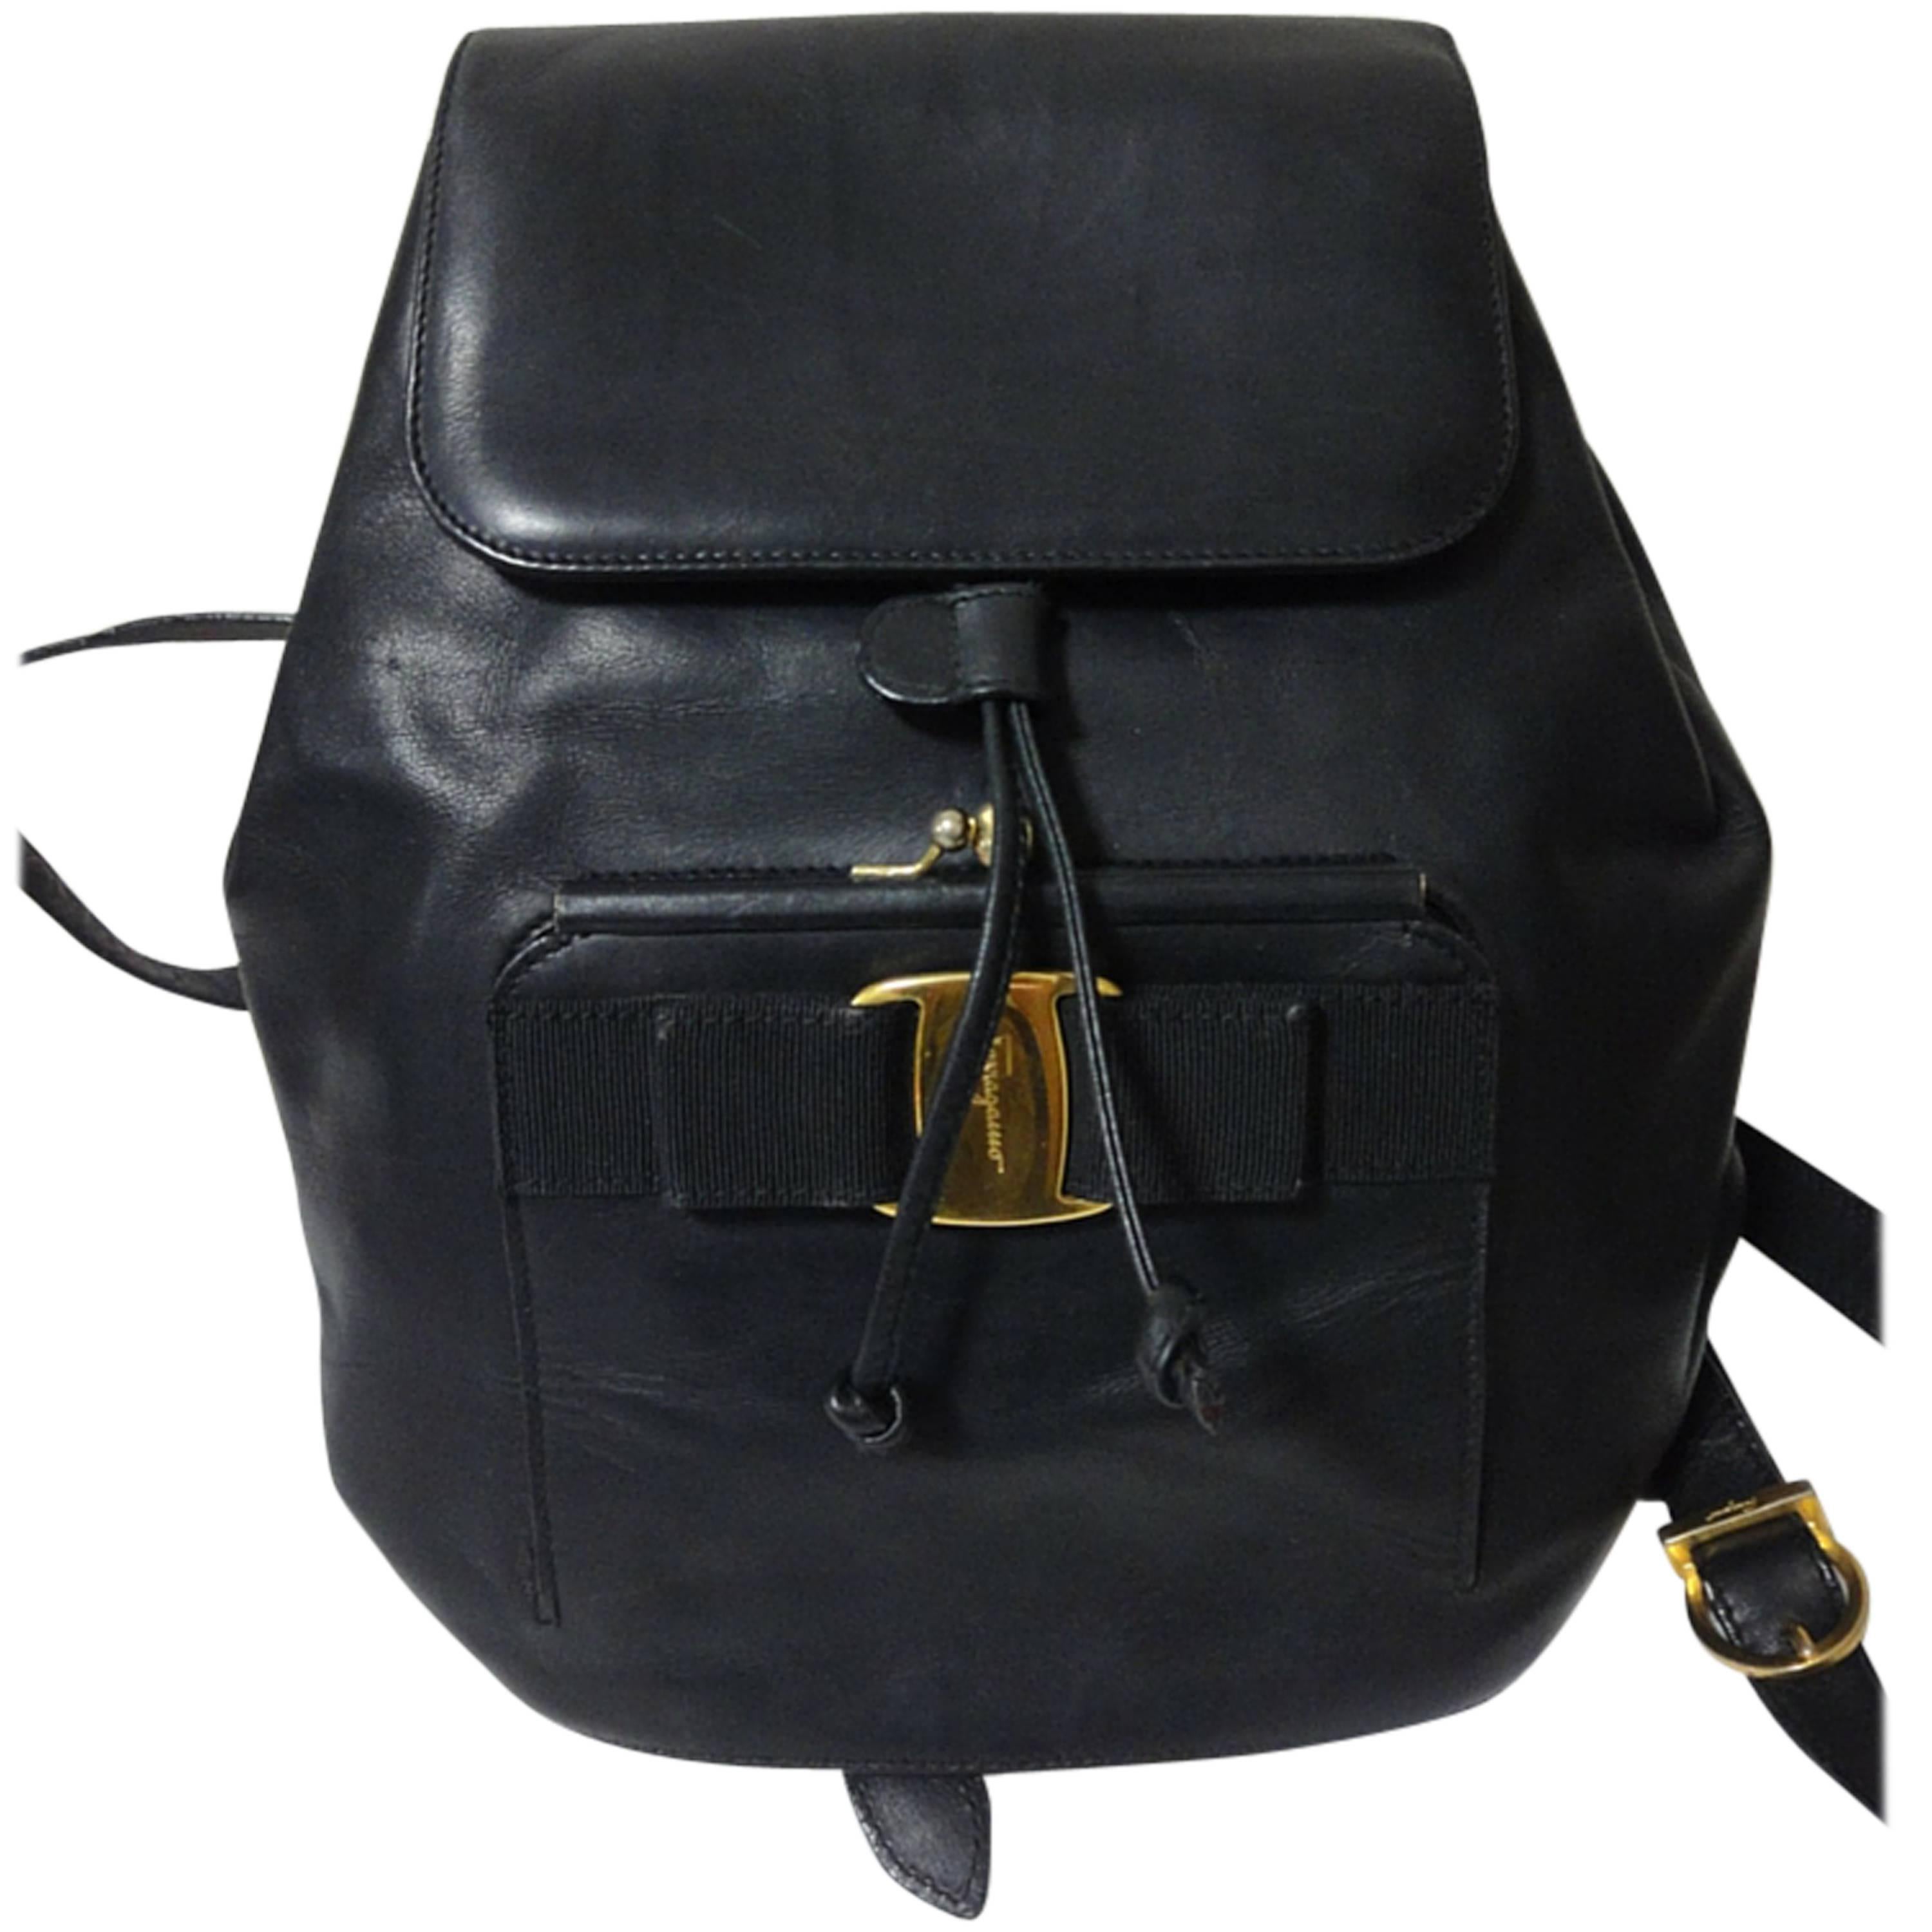 Vintage Salvatore Ferragamo black calf leather backpack from vara collection.